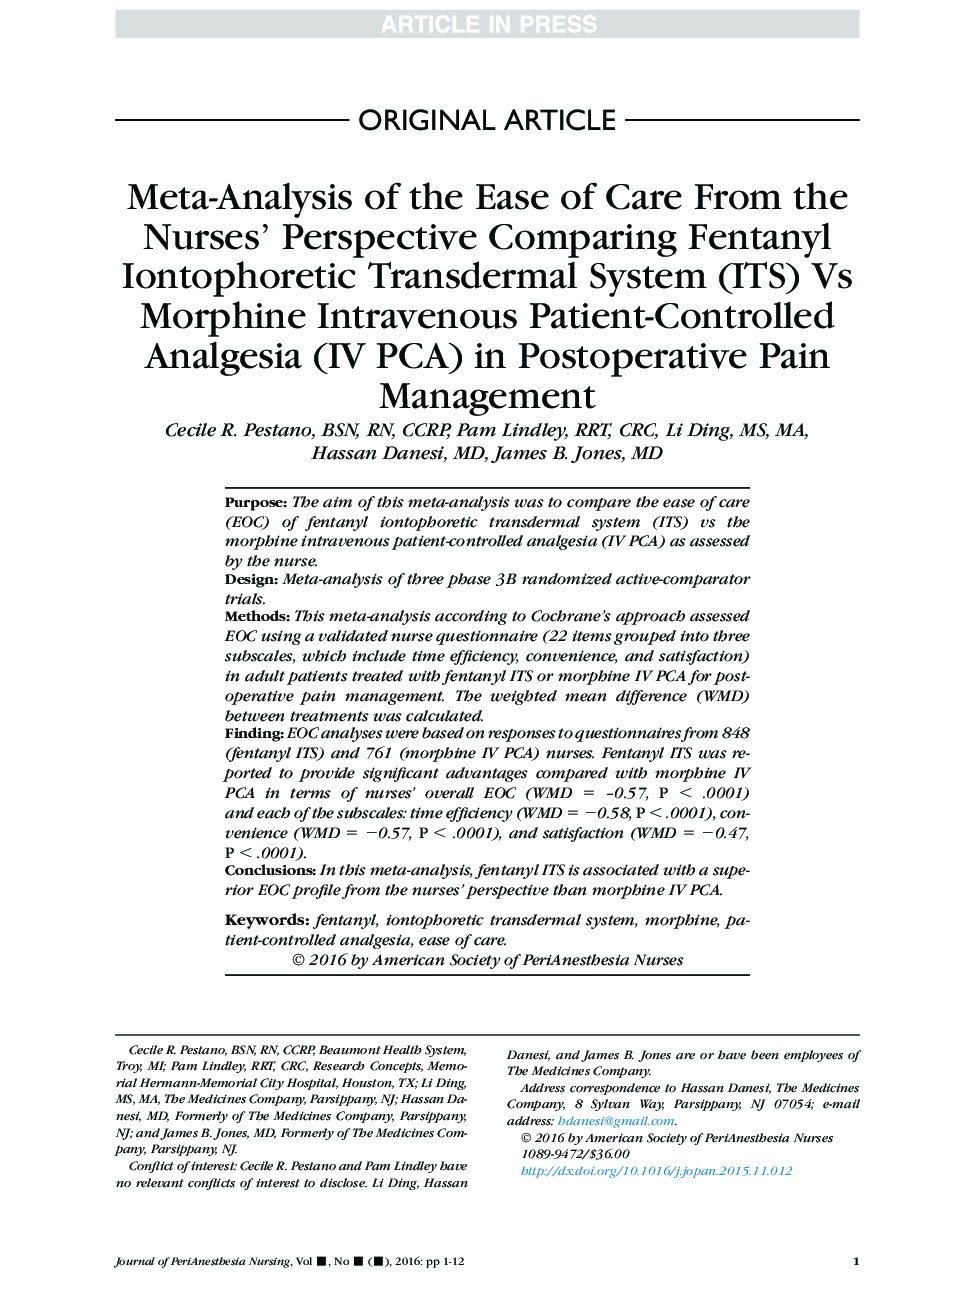 Meta-Analysis of the Ease of Care From the Nurses' Perspective Comparing Fentanyl Iontophoretic Transdermal System (ITS) Vs Morphine Intravenous Patient-Controlled Analgesia (IV PCA) in Postoperative Pain Management